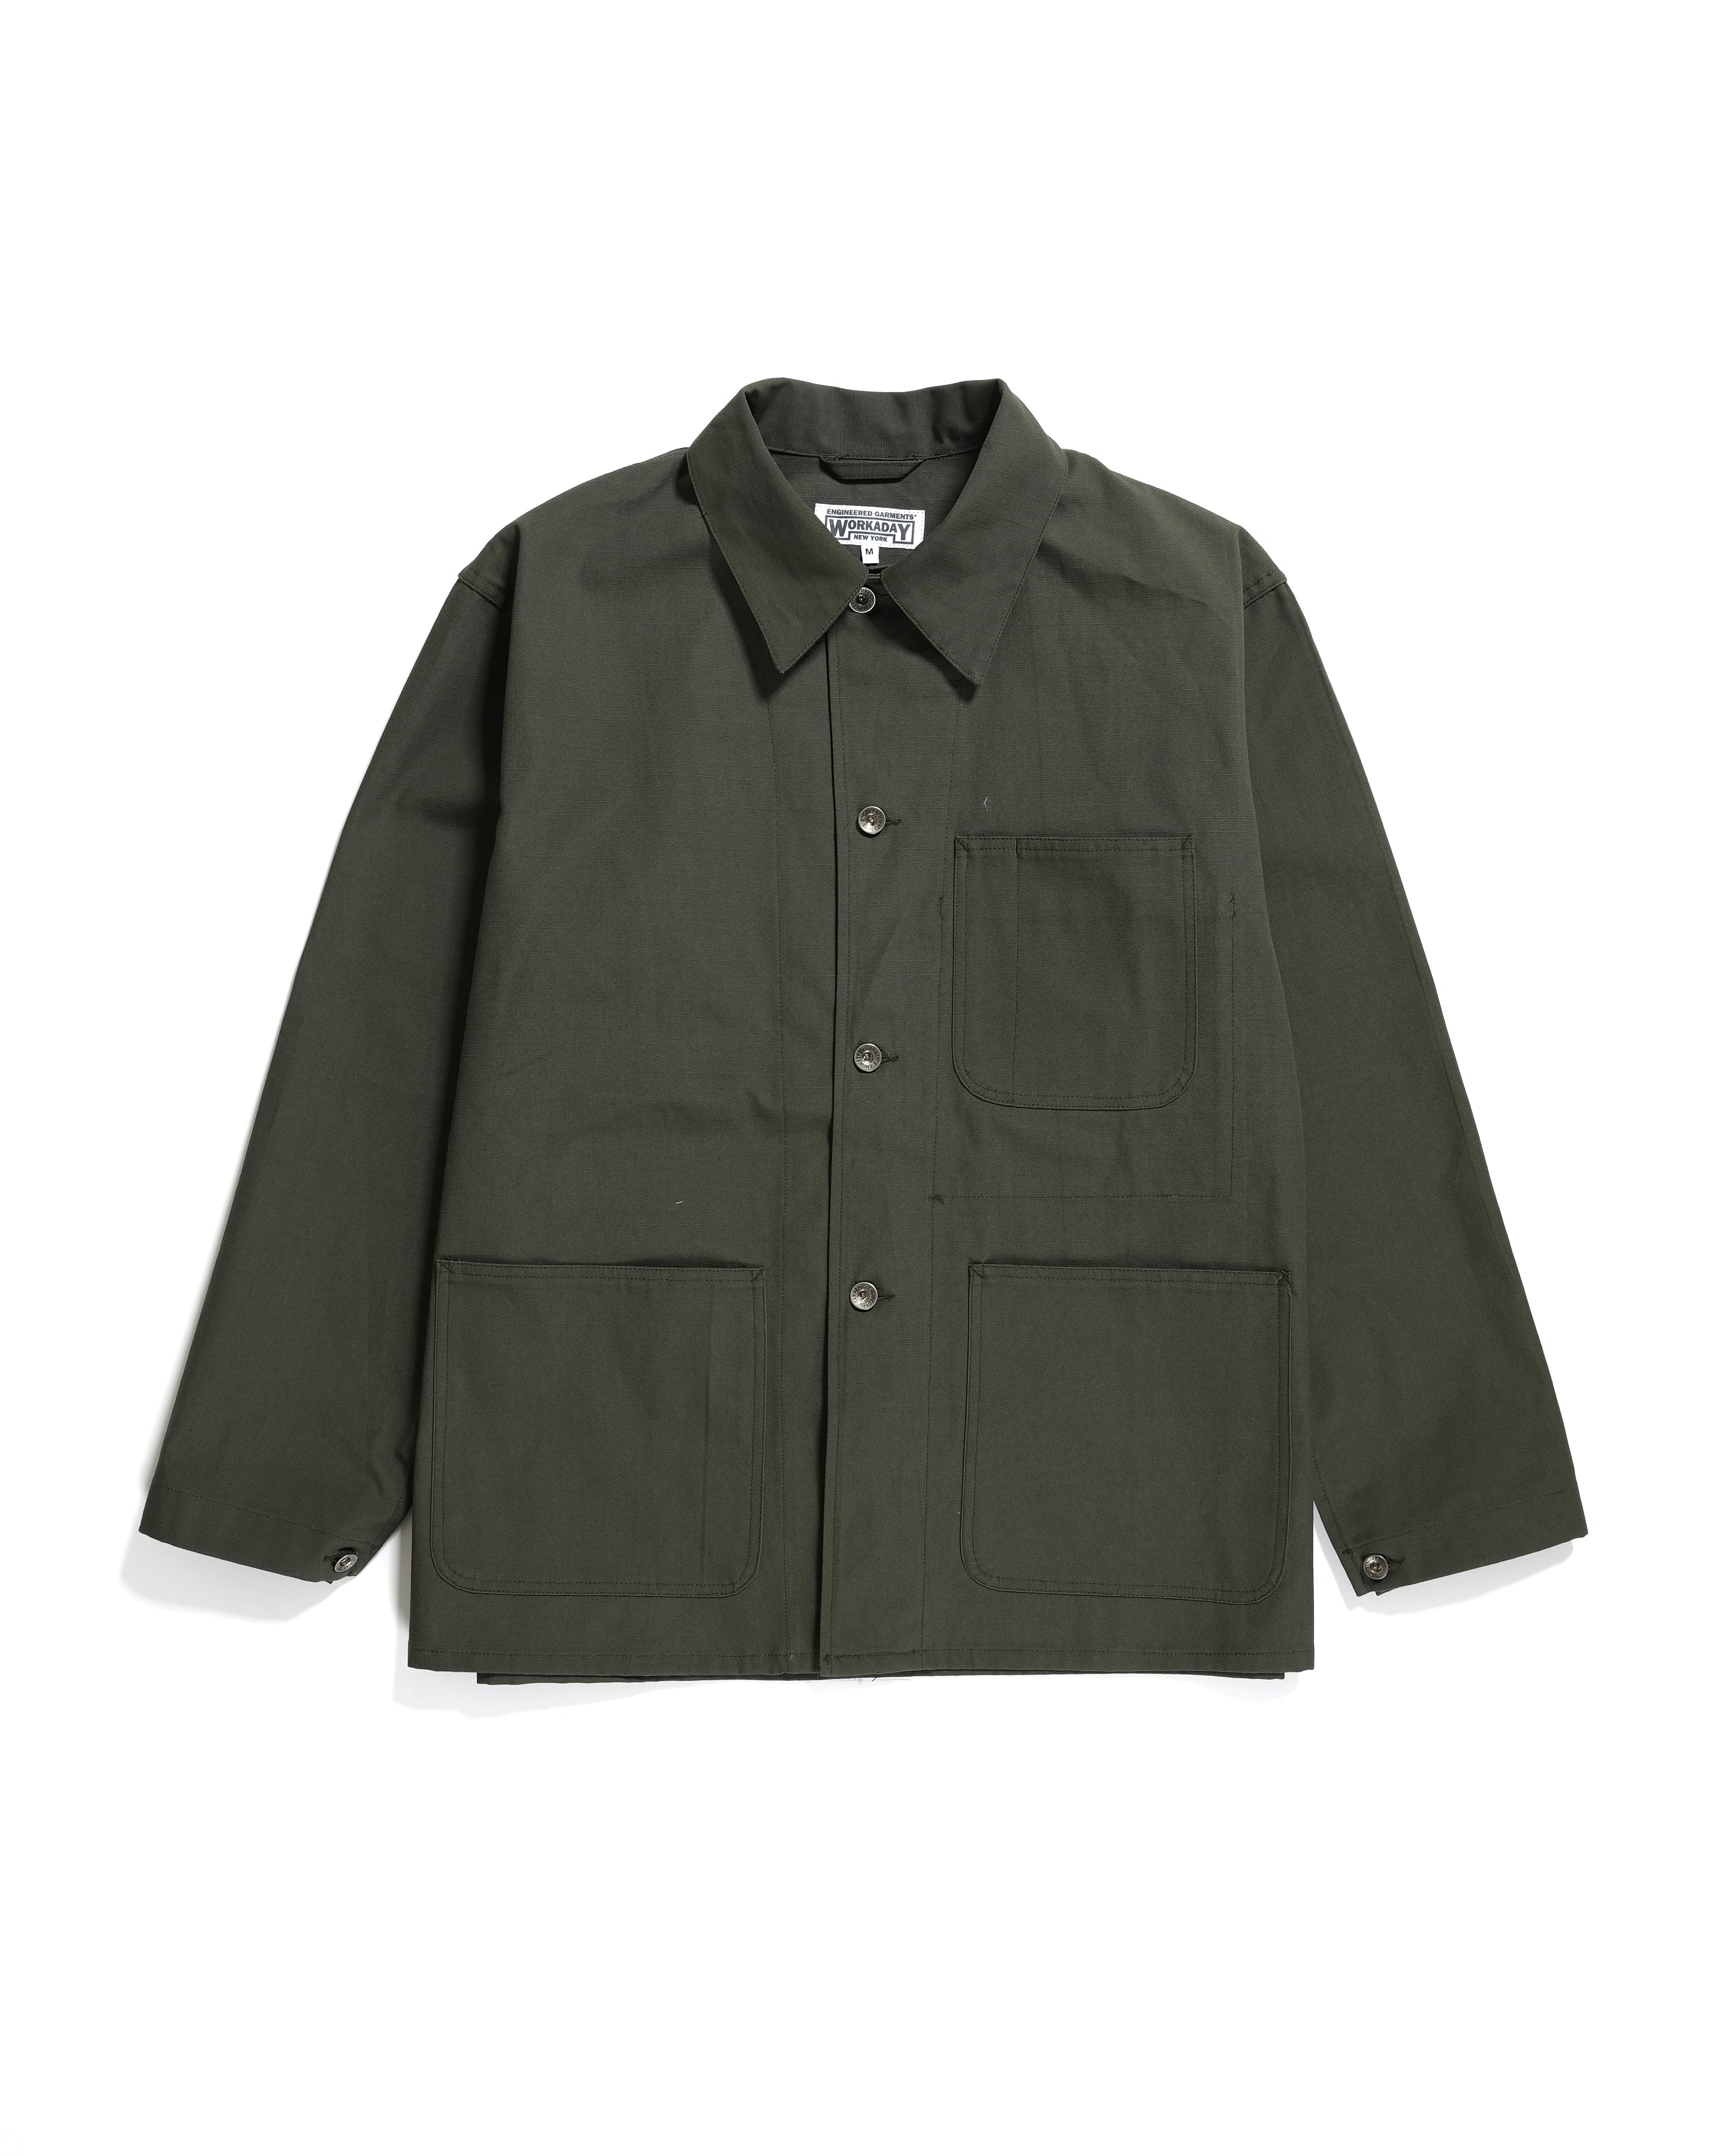 Utility Jacket - Olive Heavyweight Cotton Ripstop